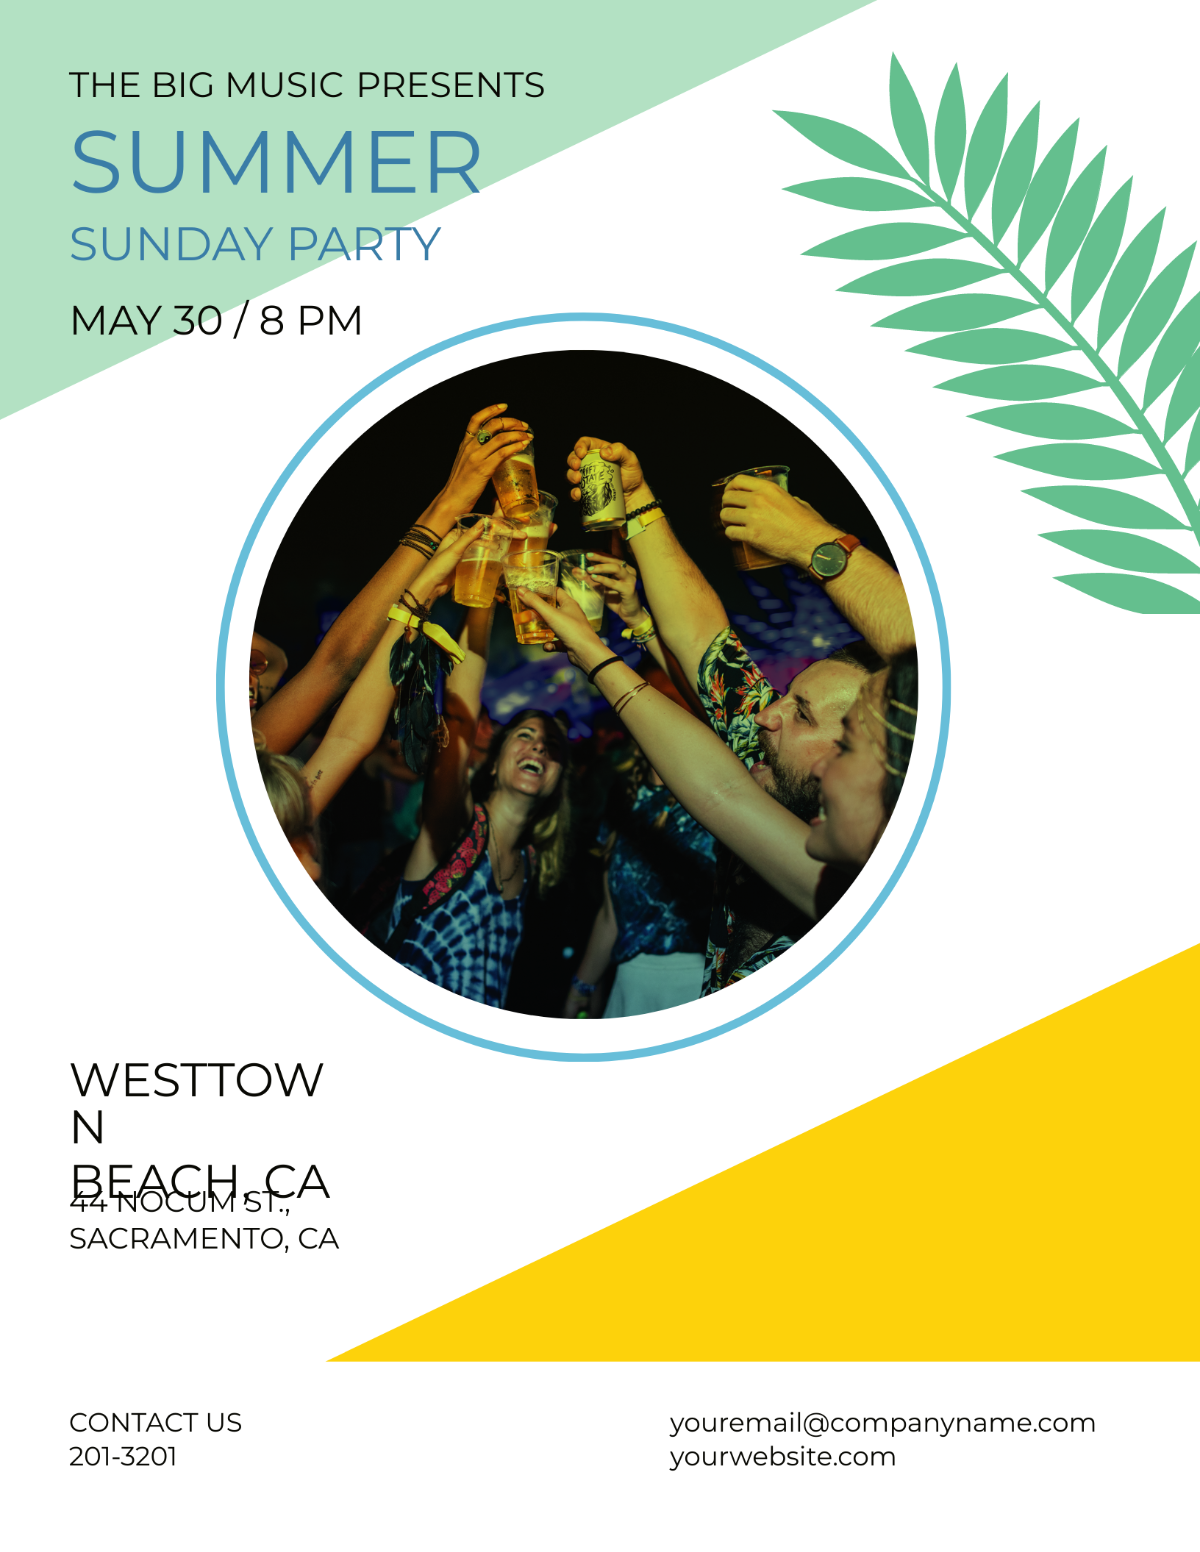 Summer Sunday Party Flyer Template